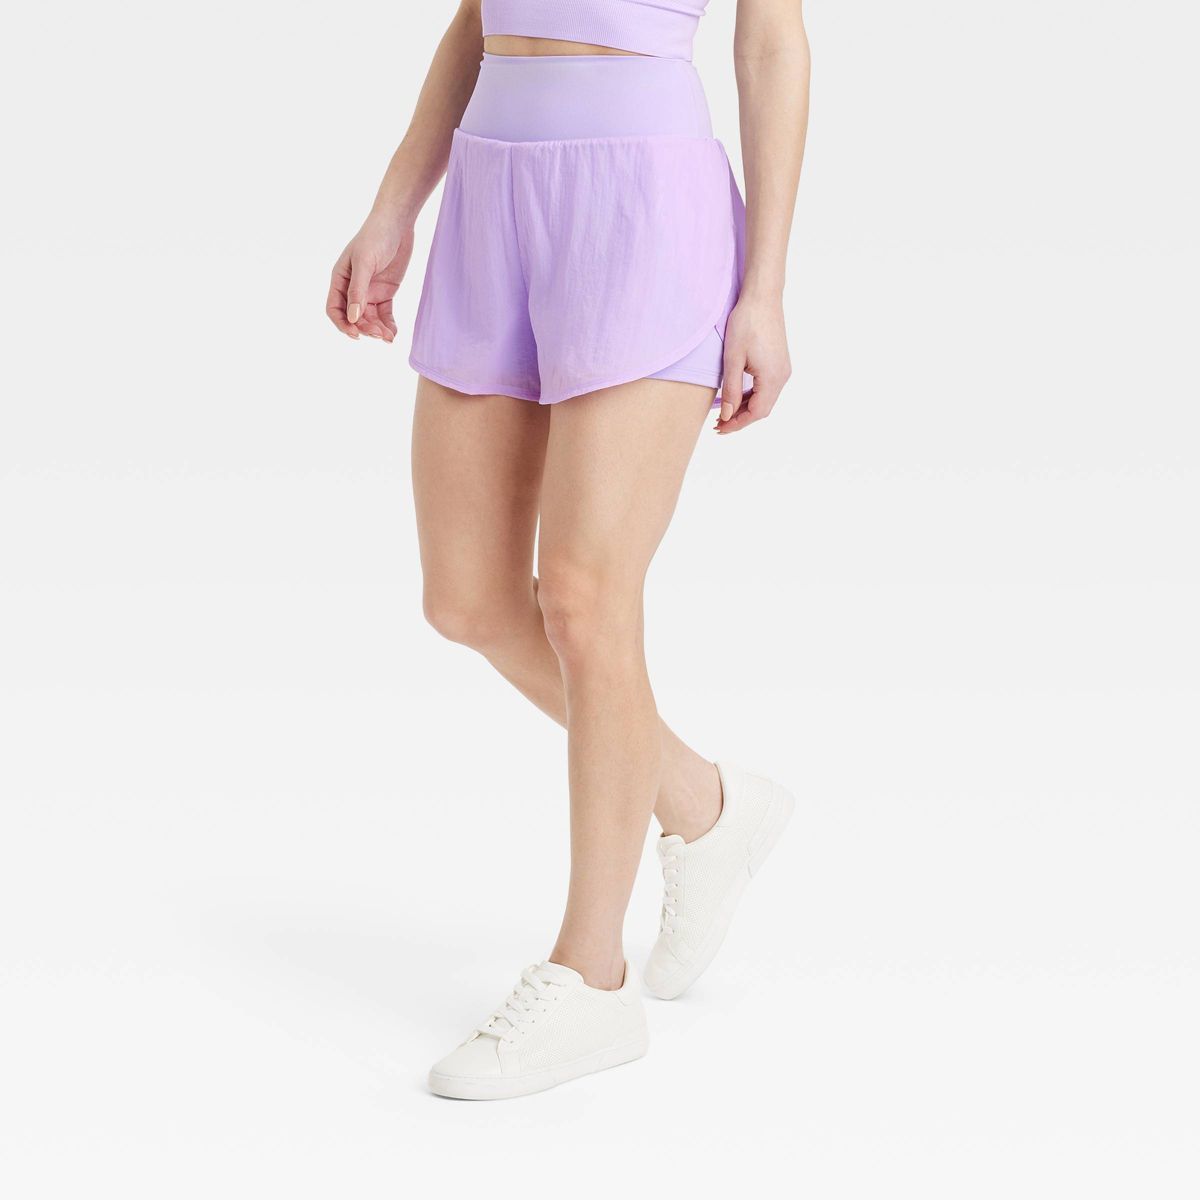 Women's Woven High-Rise 2-in-1 Run Shorts 3" - All In Motion™ | Target